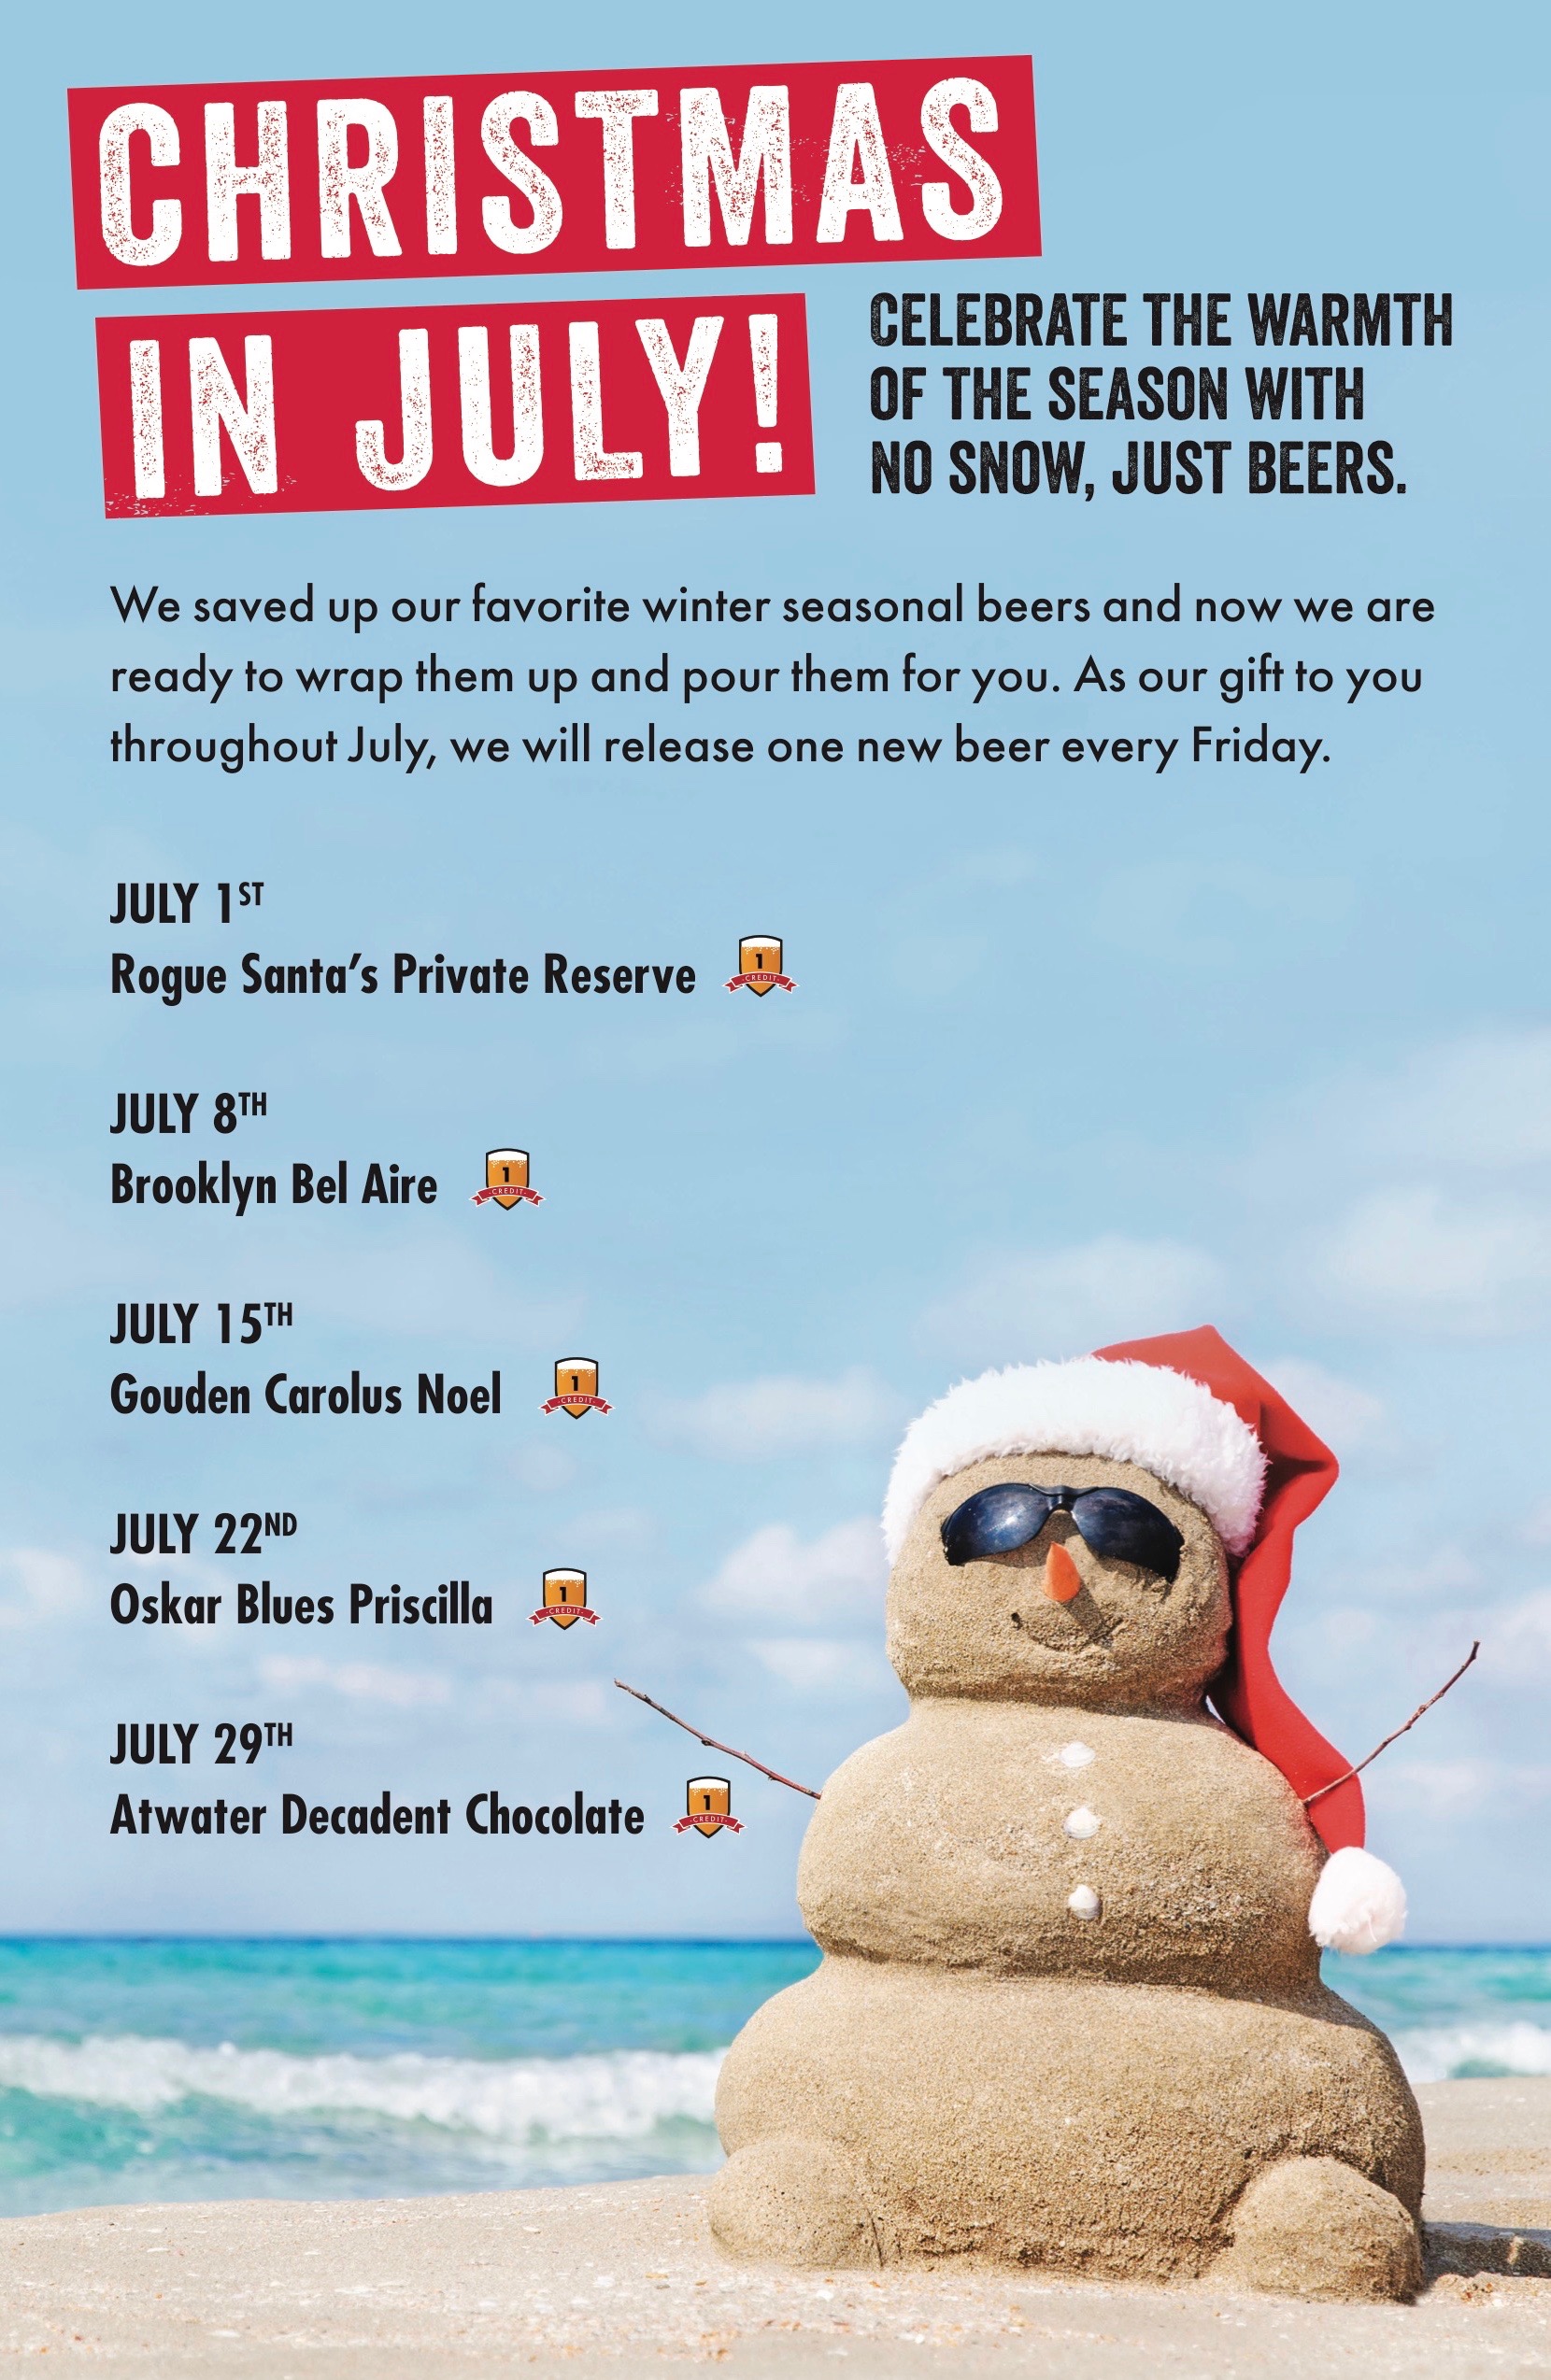 Christmas in July celebrate the warmth of the season with no snow, just beers